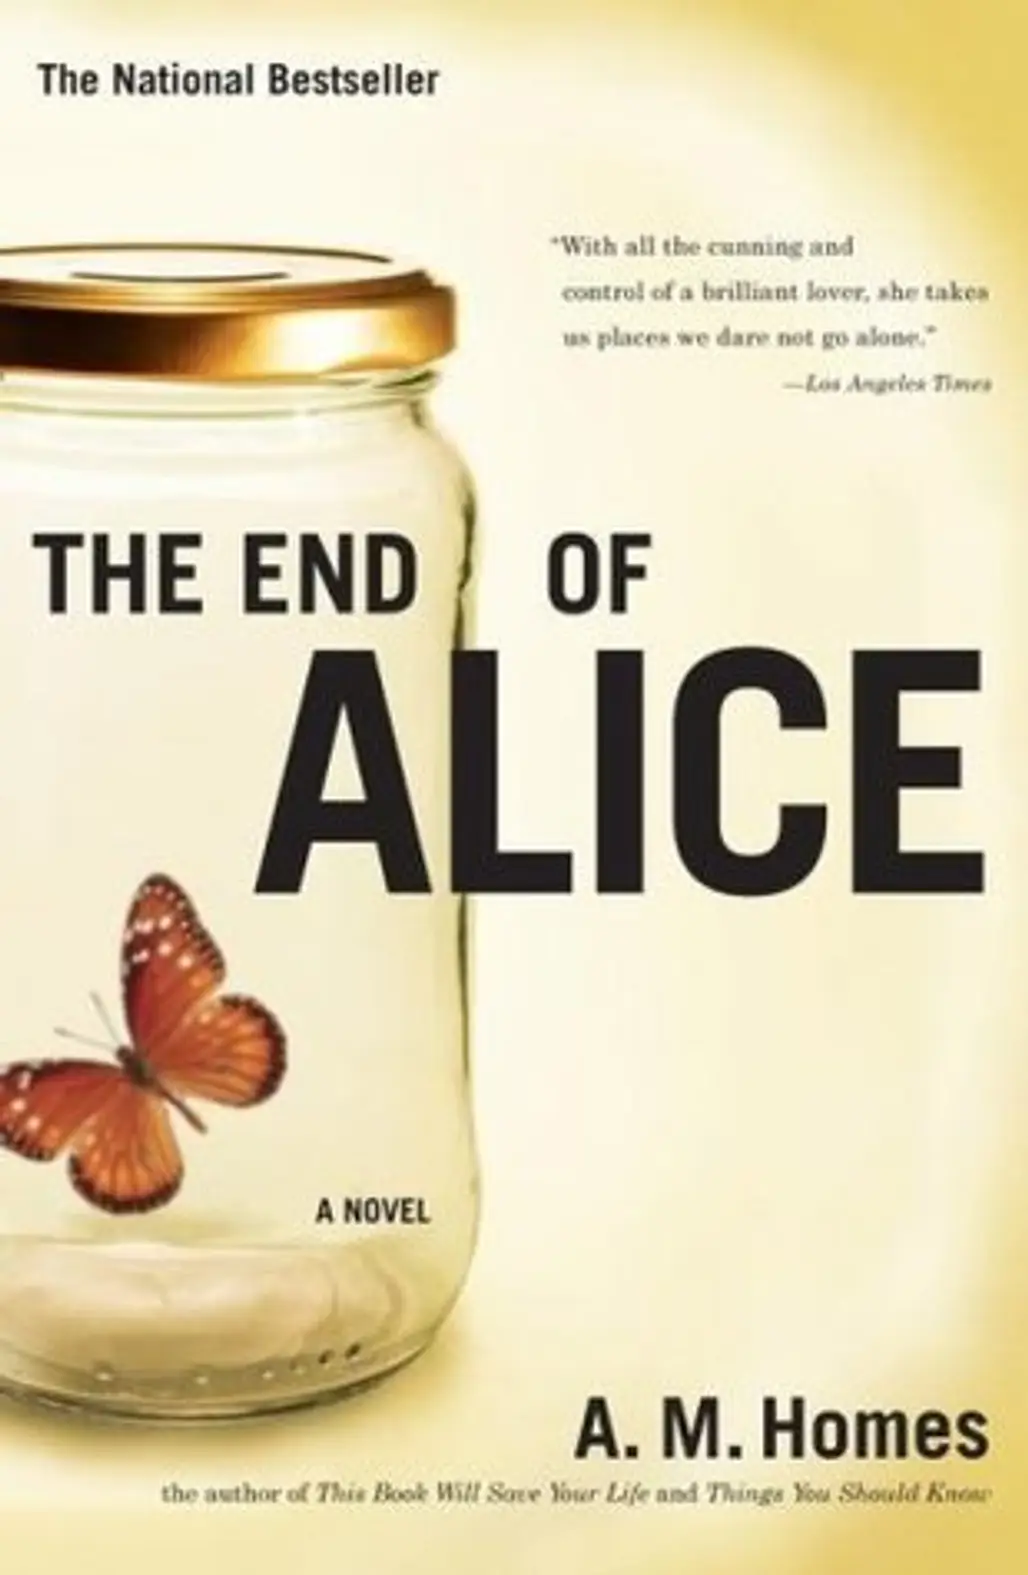 The End of Alice by a M Homes